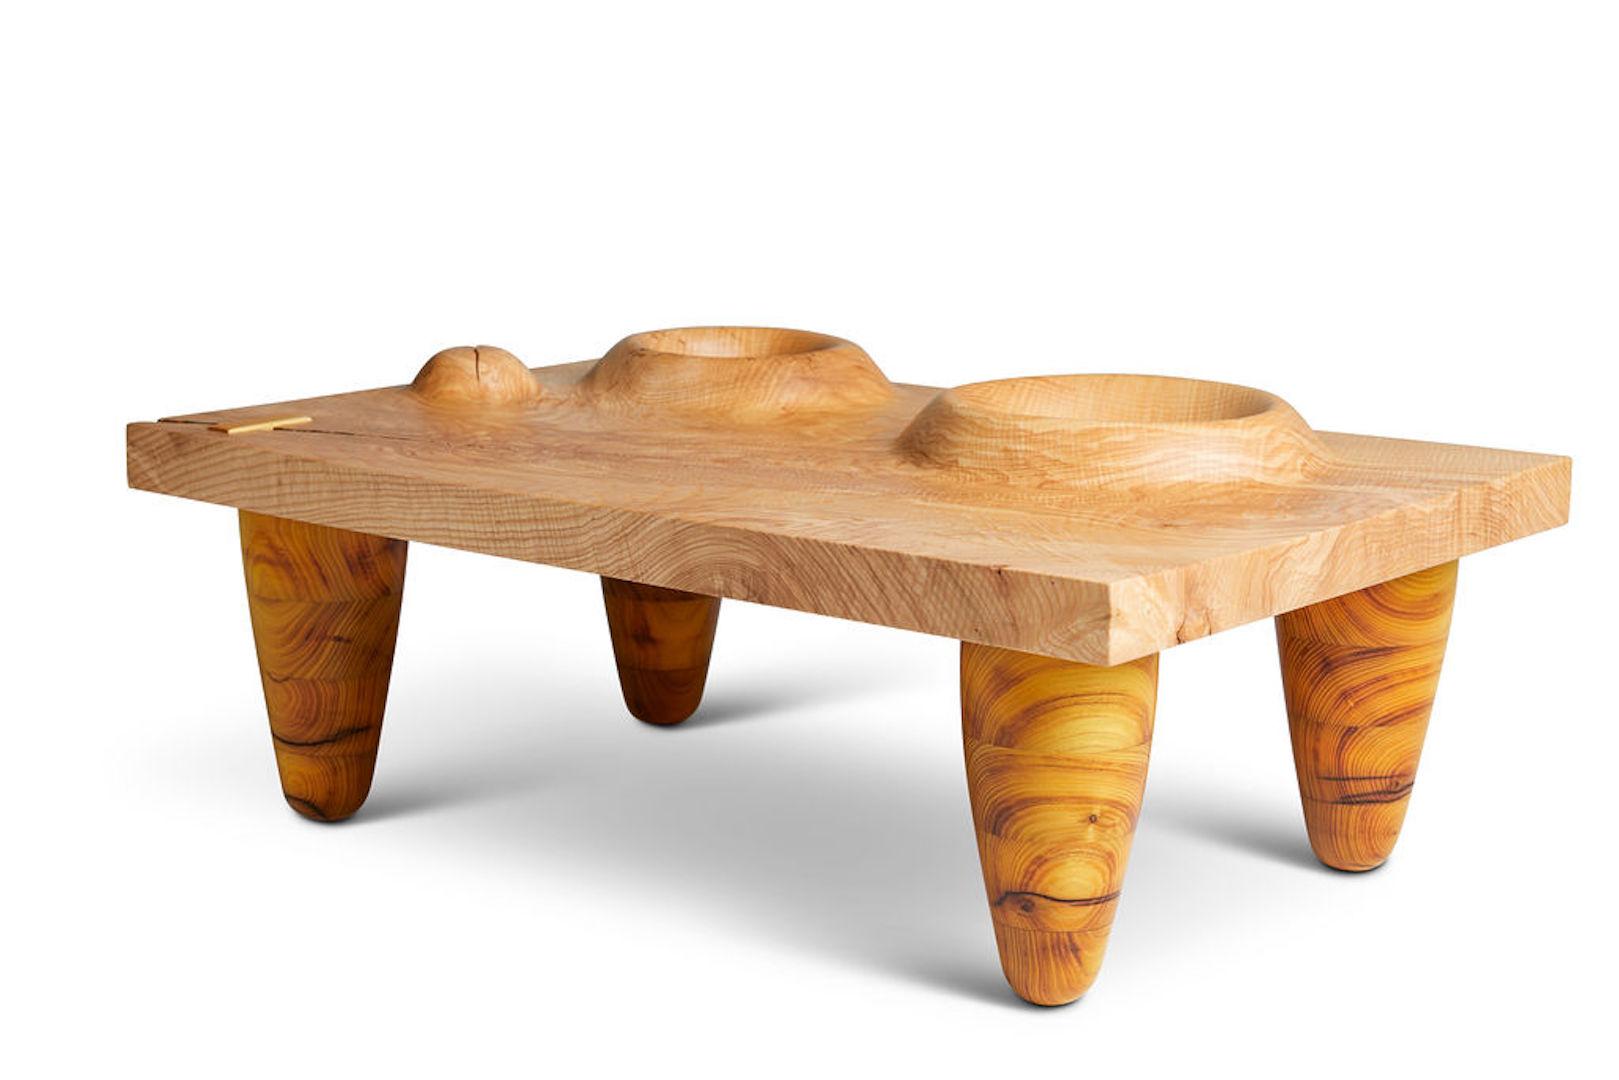 Sculptural coffee table with a hand carved figured ash top and turned osage orange legs.